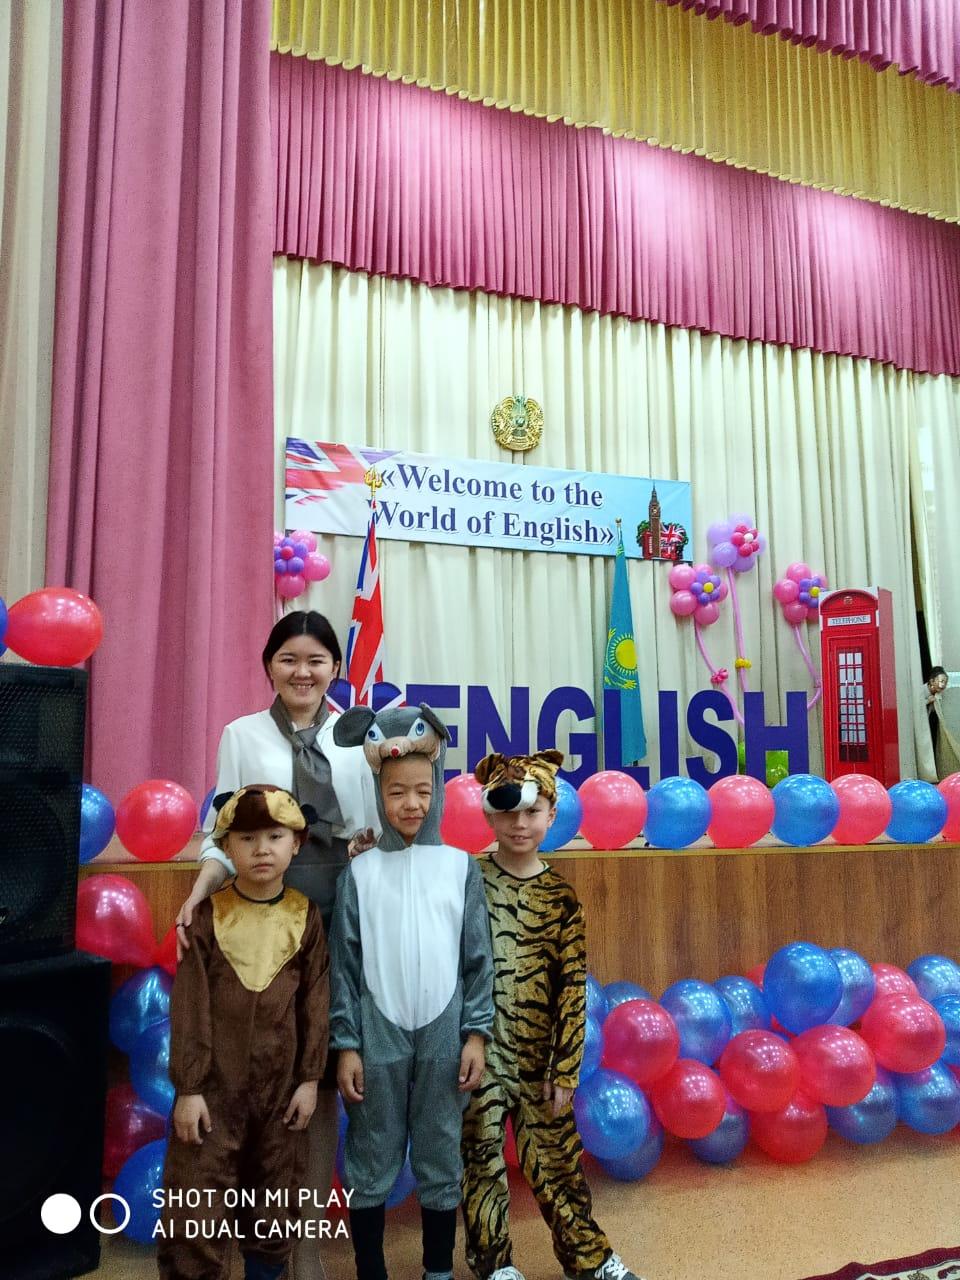 “Welcome to the world of  English”